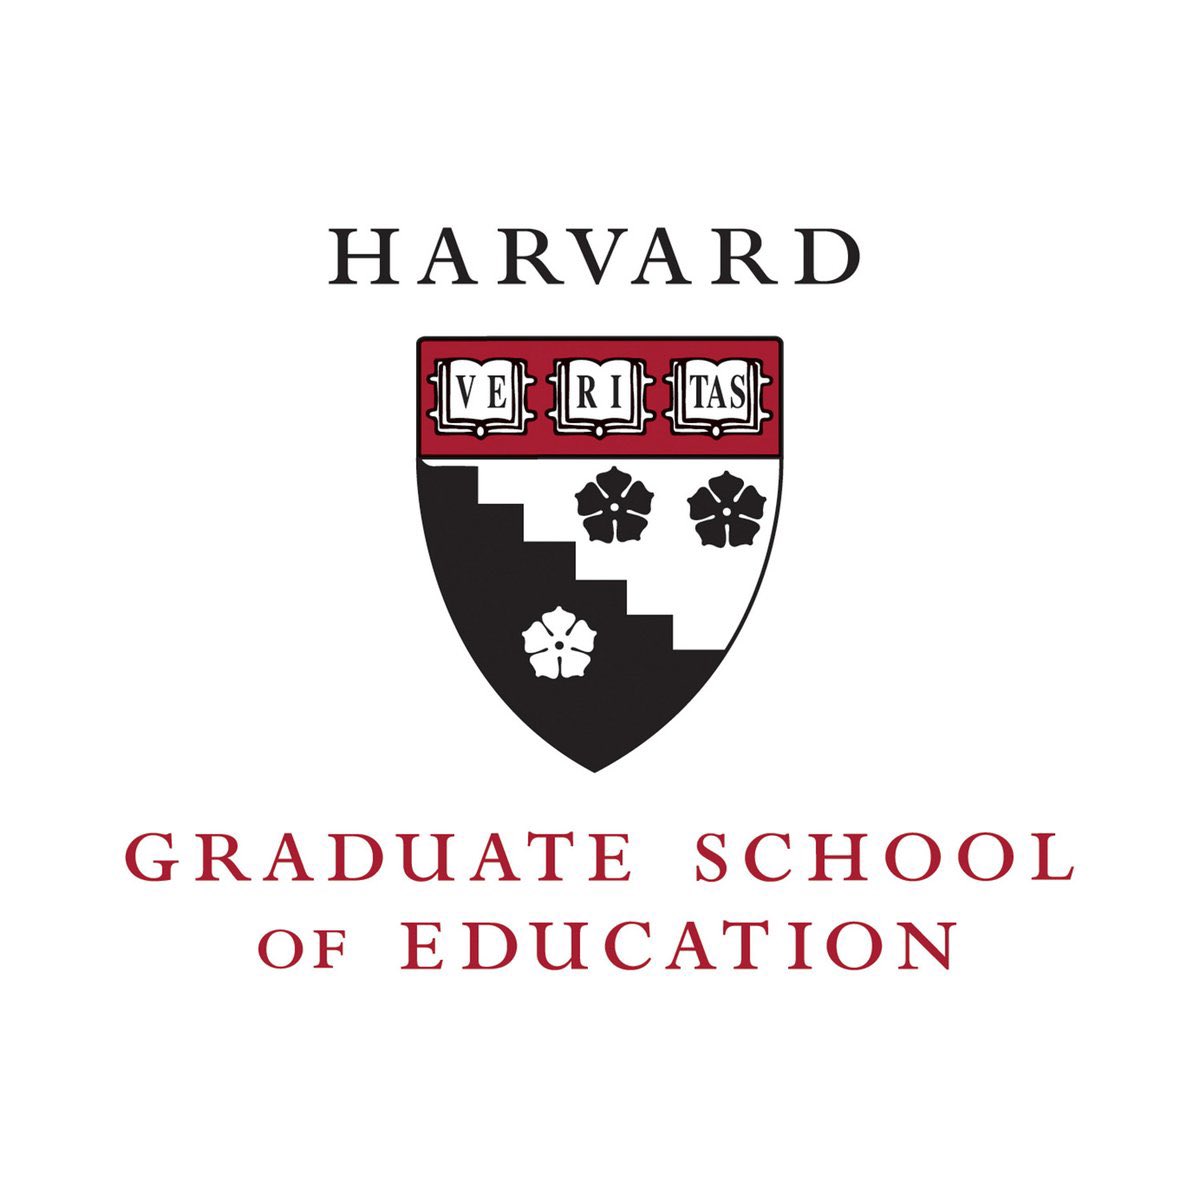 I am happy to end my summer facilitating Achieving Excellence: Leadership Development for Principals @hgse! @CharlesButtFdn @TomballISD